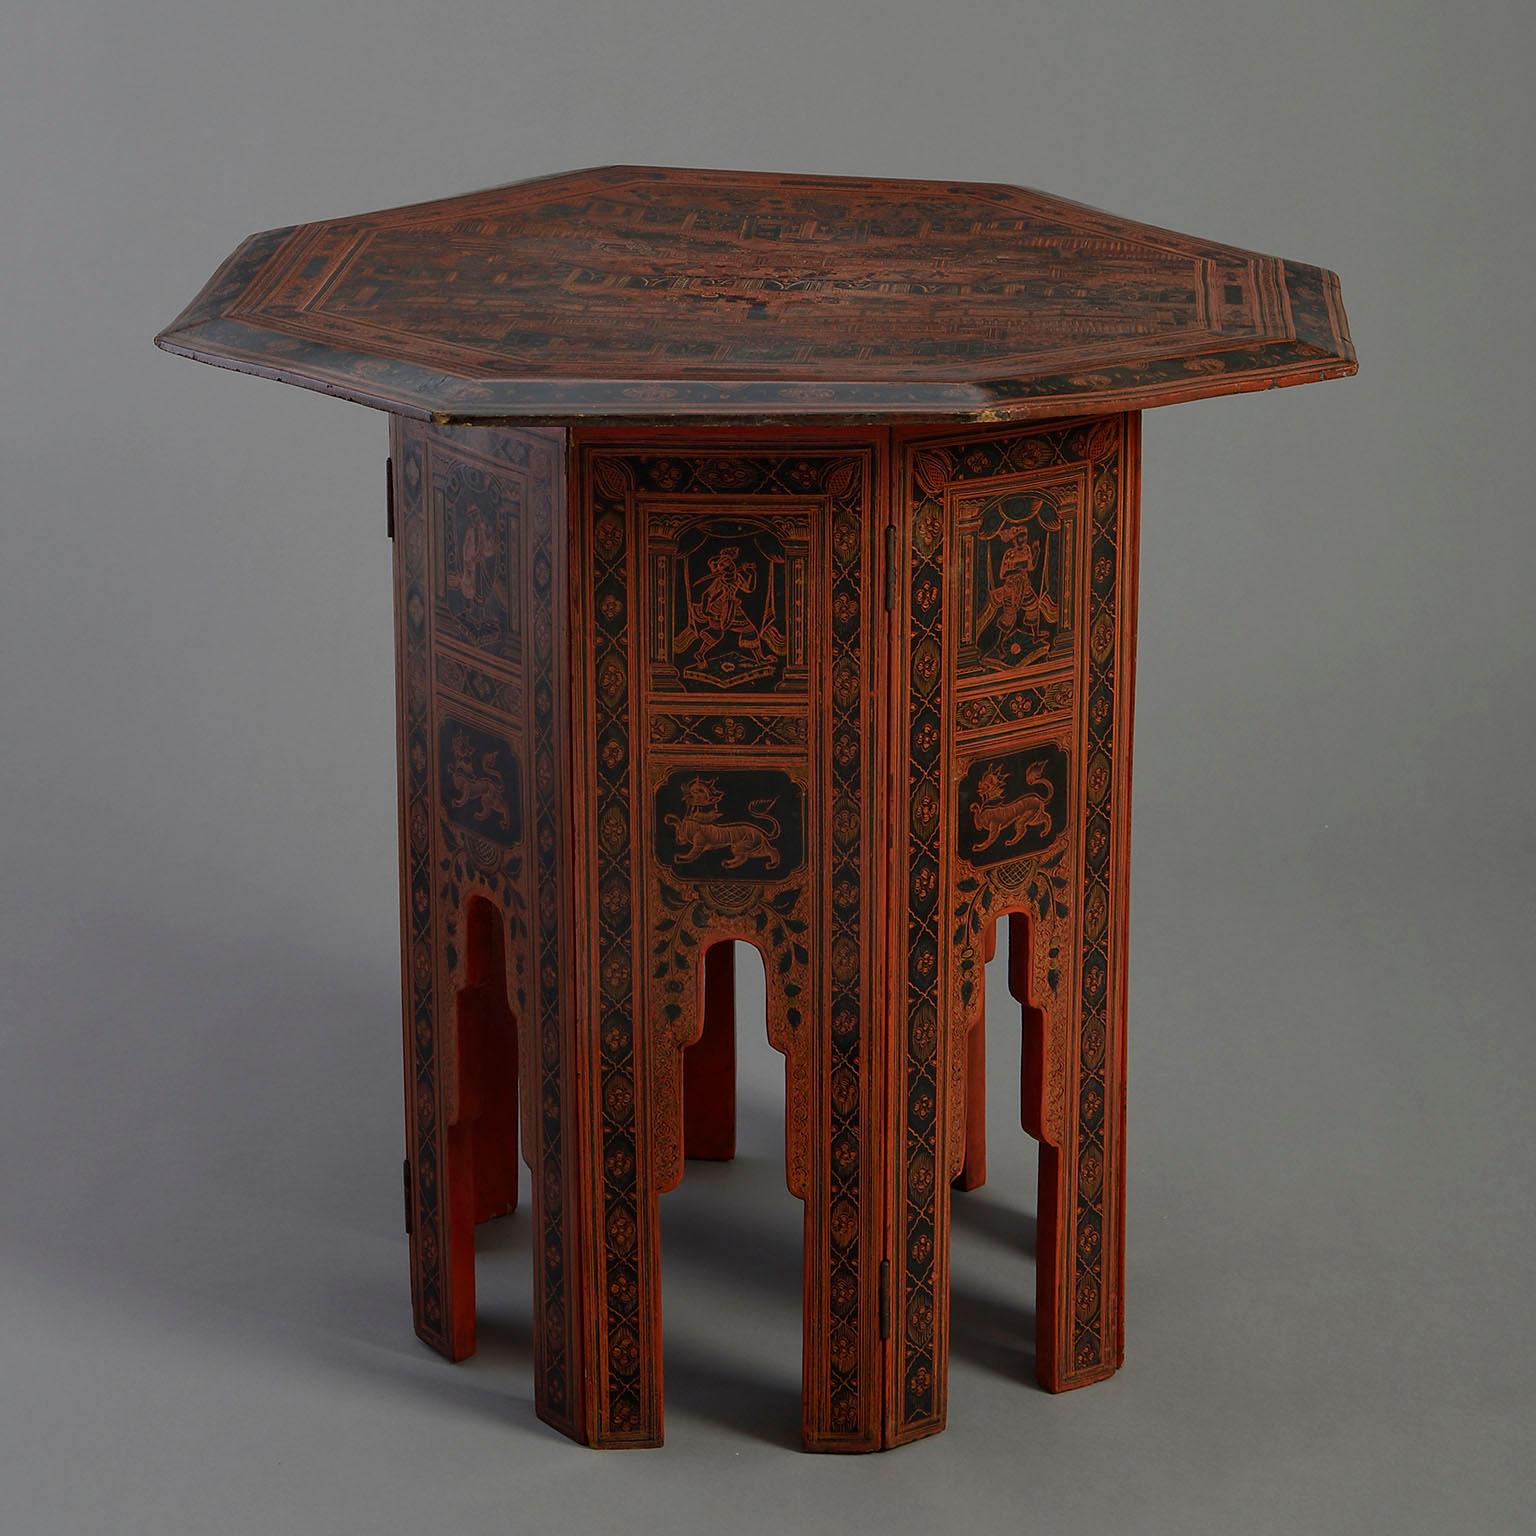 An early twentieth century red lacquer low occasional table, the top of octagonal form and decorated throughout with court scenes, the base of arched panels.

Circa 1900 Oriental

Dimensions: 29 W x 29 D x 27 H inches
74 W x 74 D x 69 H cm